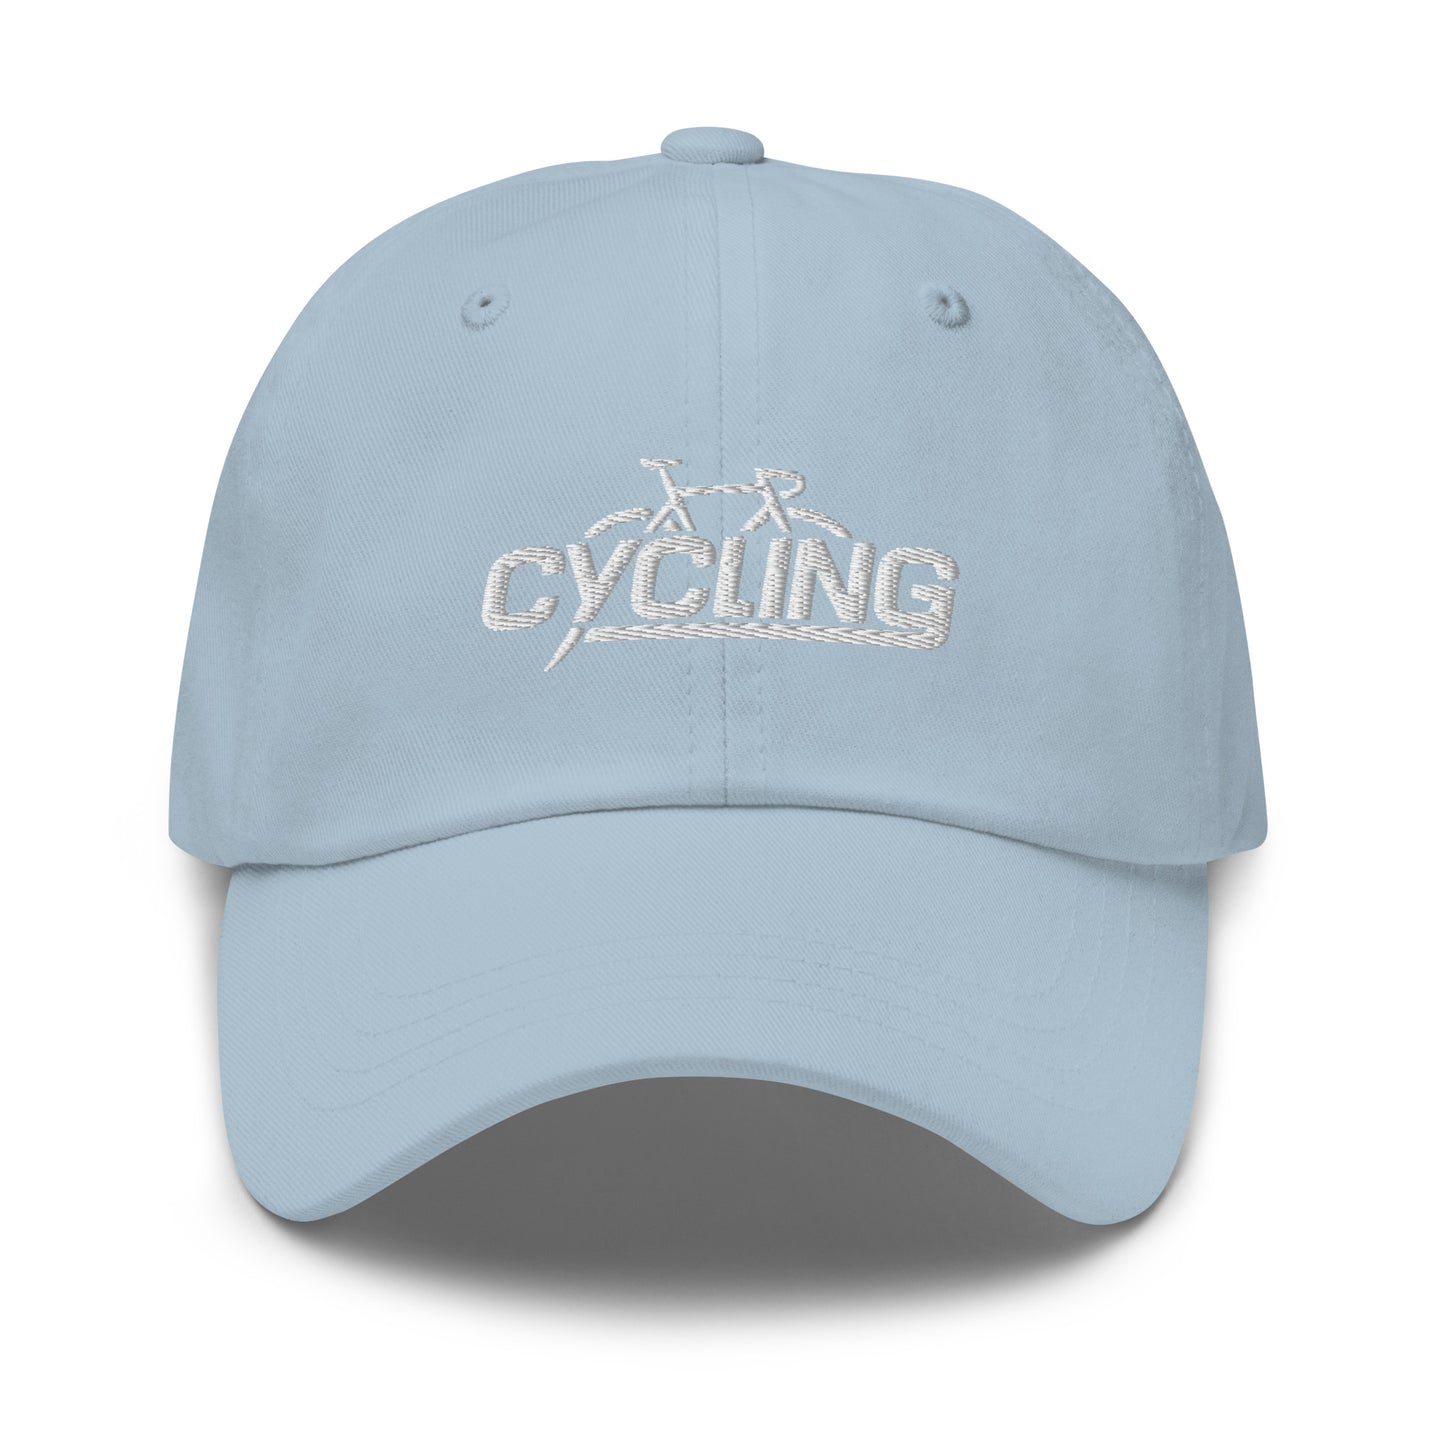 Bike and Cycling Embroidered Hat